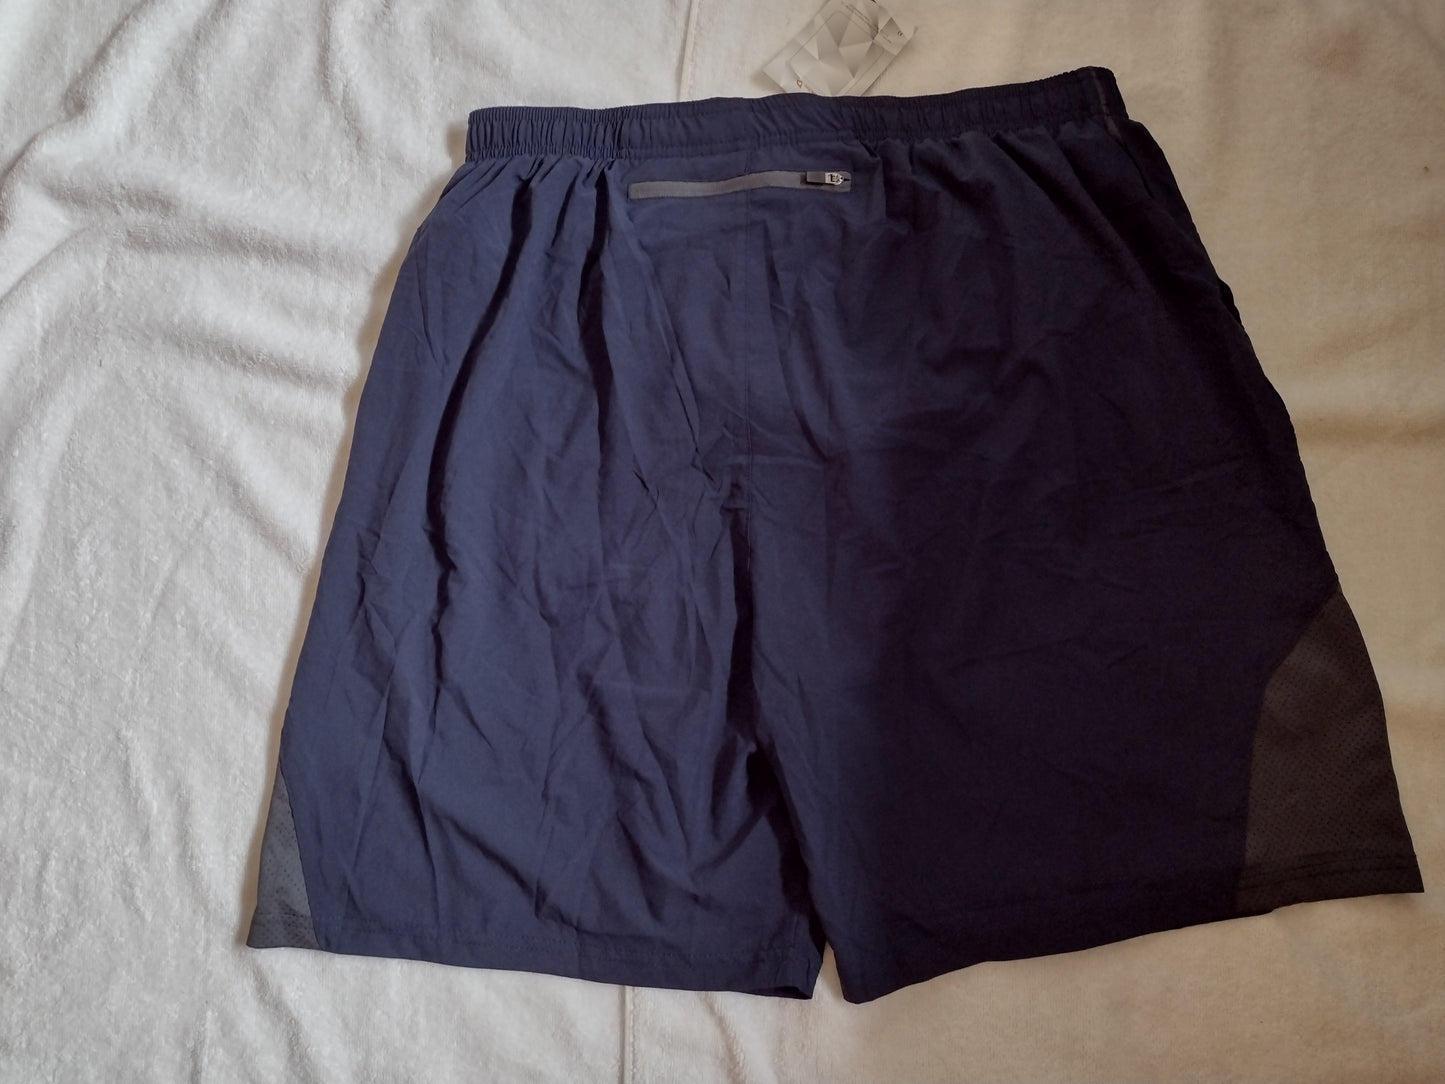 Men's Fitness/Running Shorts with Built-In Briefs by Baleaf Navy Size XL